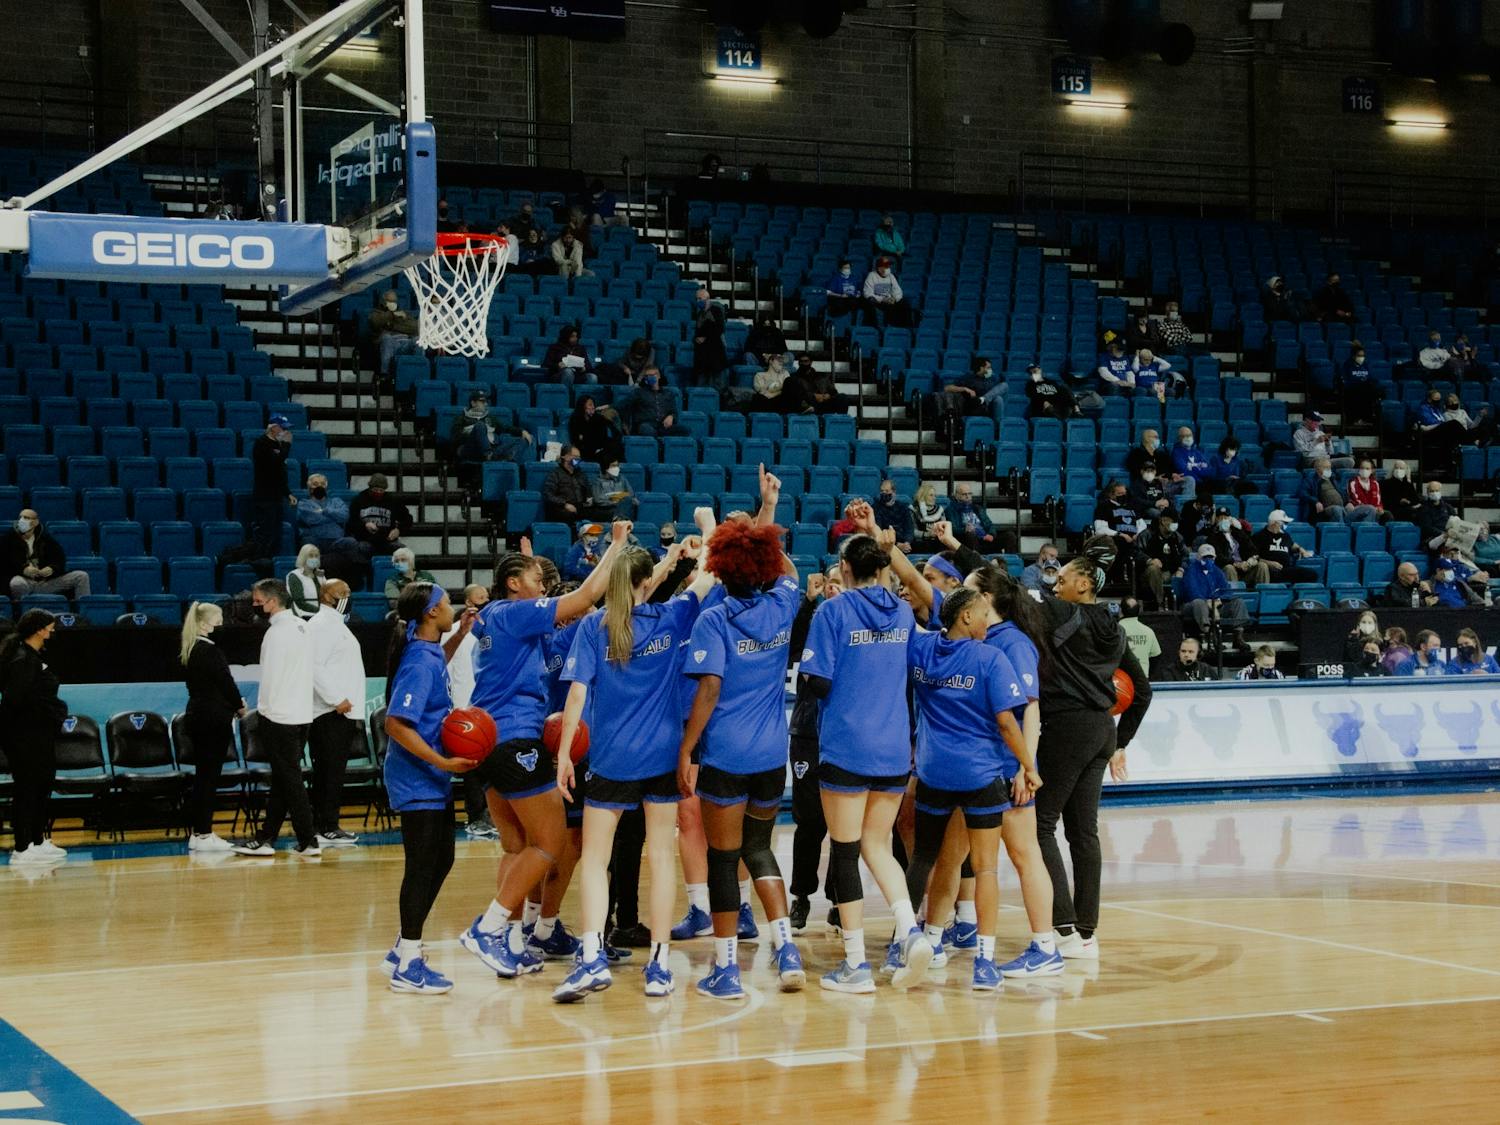 The women's basketball team huddles up before a recent game against Ohio University.